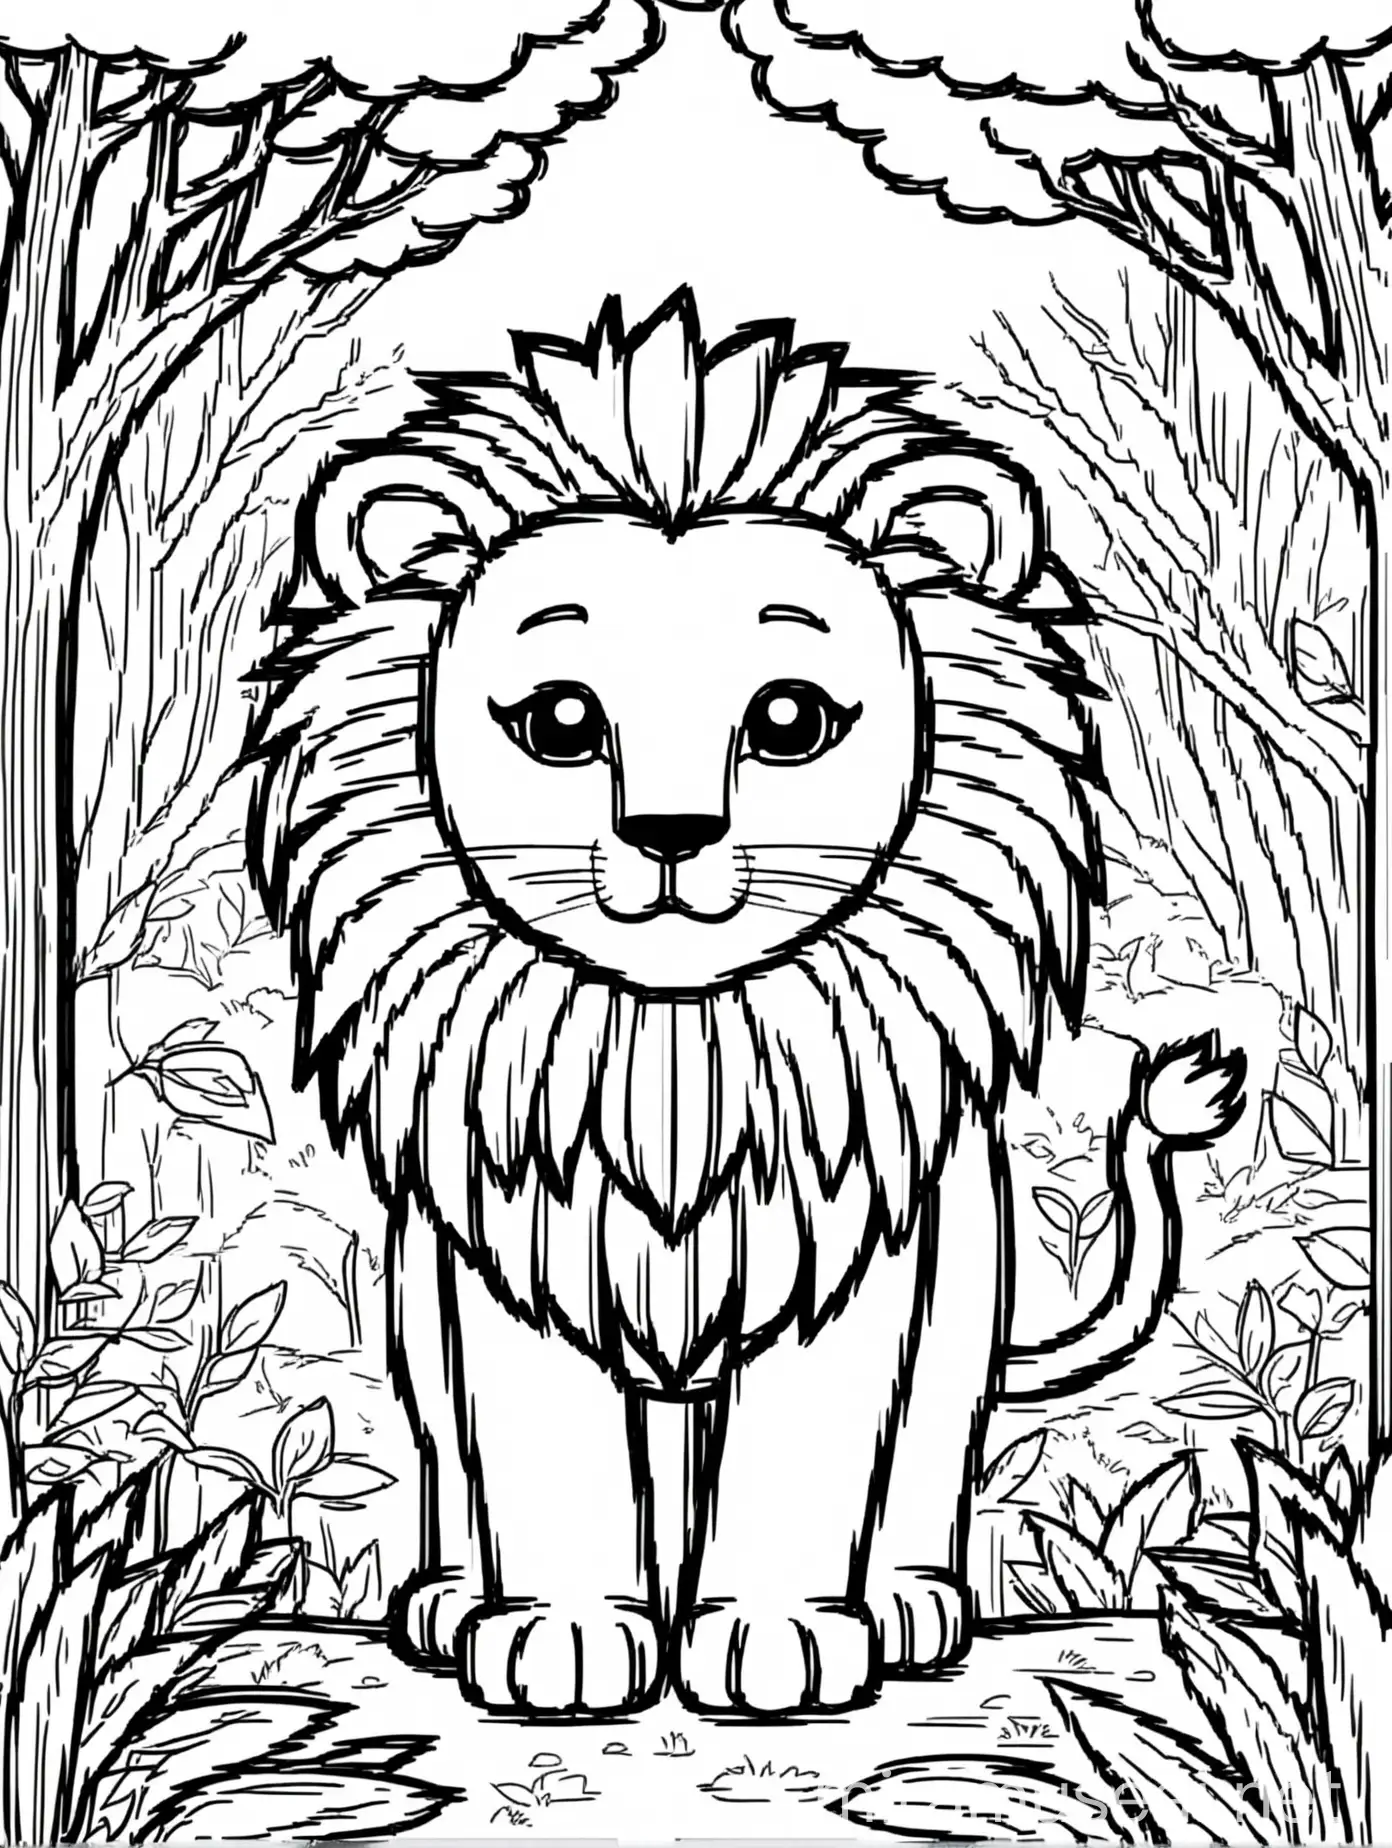 Cute Lion Coloring Page Simple Black and White Outline Art for Kids